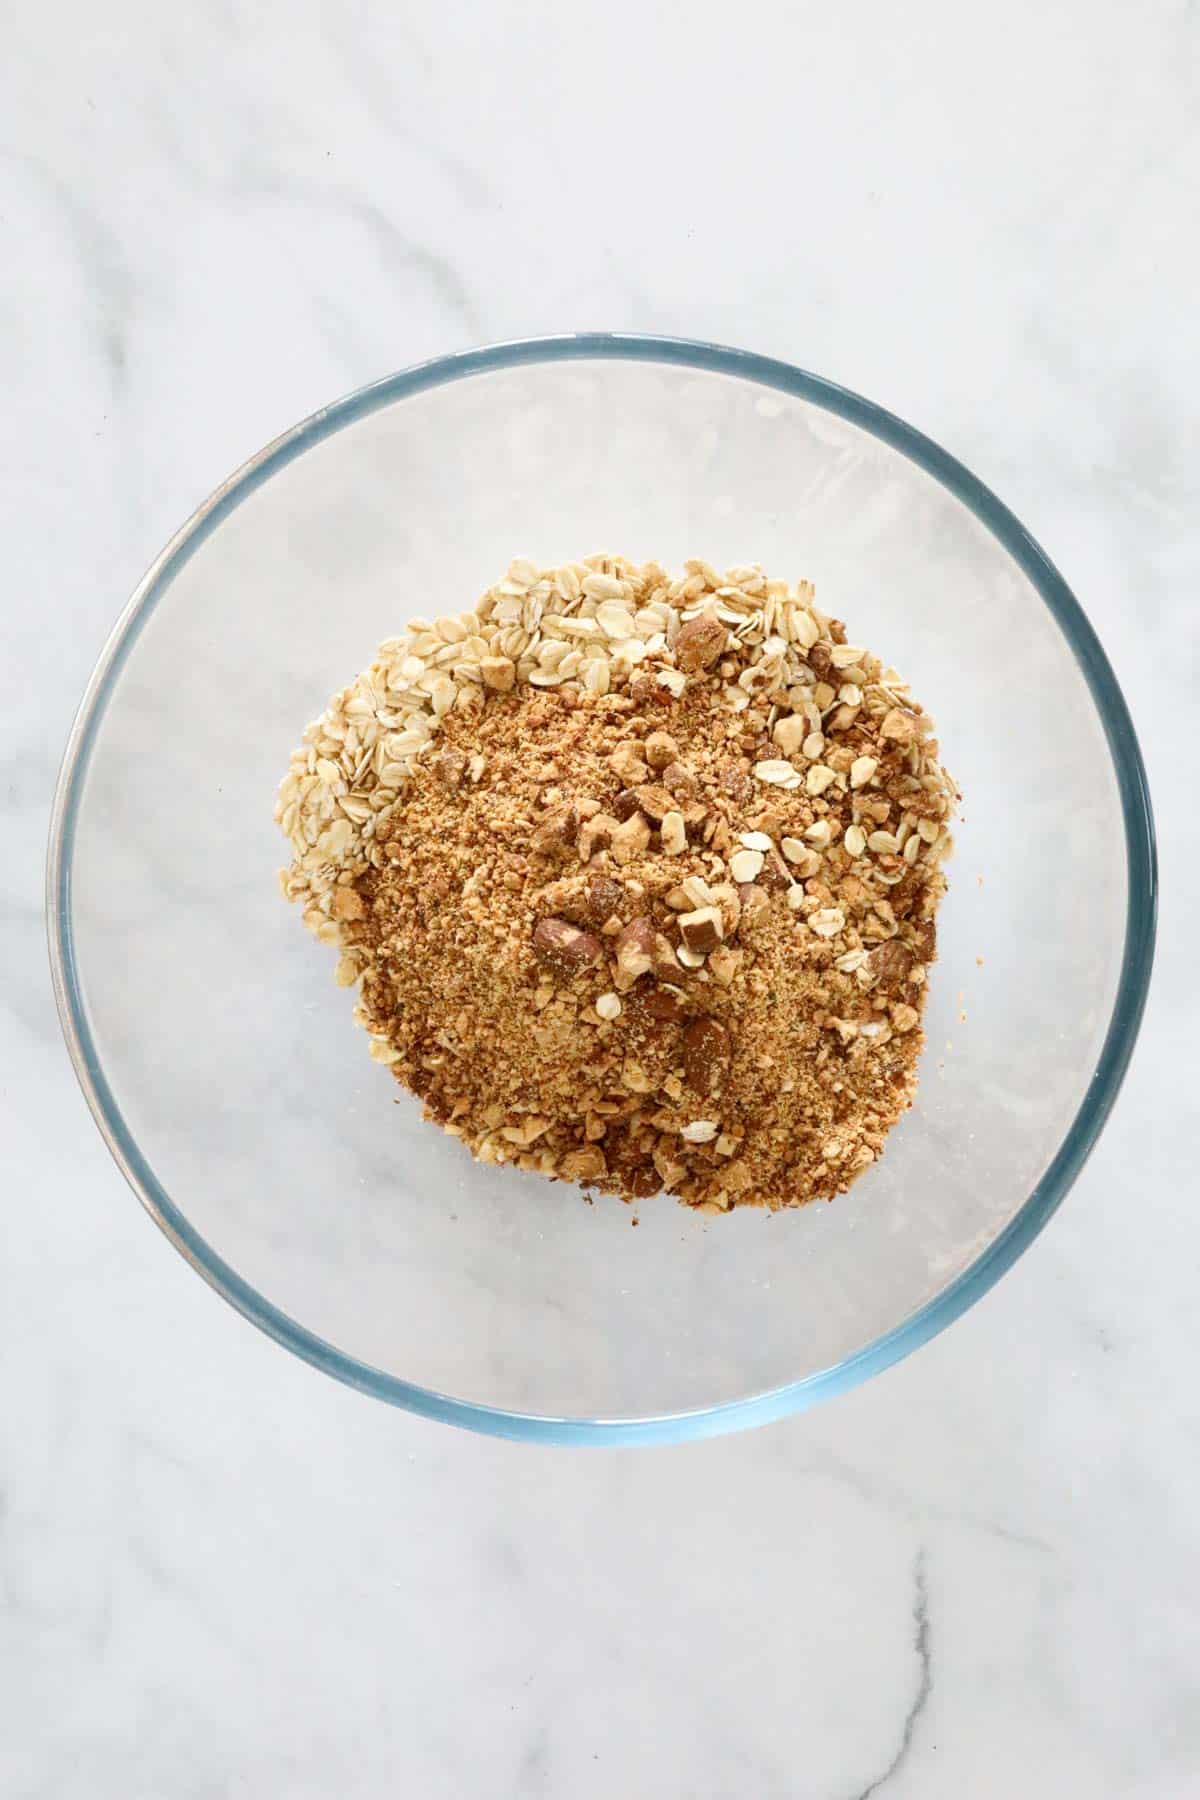 Rolled oats and chopped almonds in a clear glass bowl.